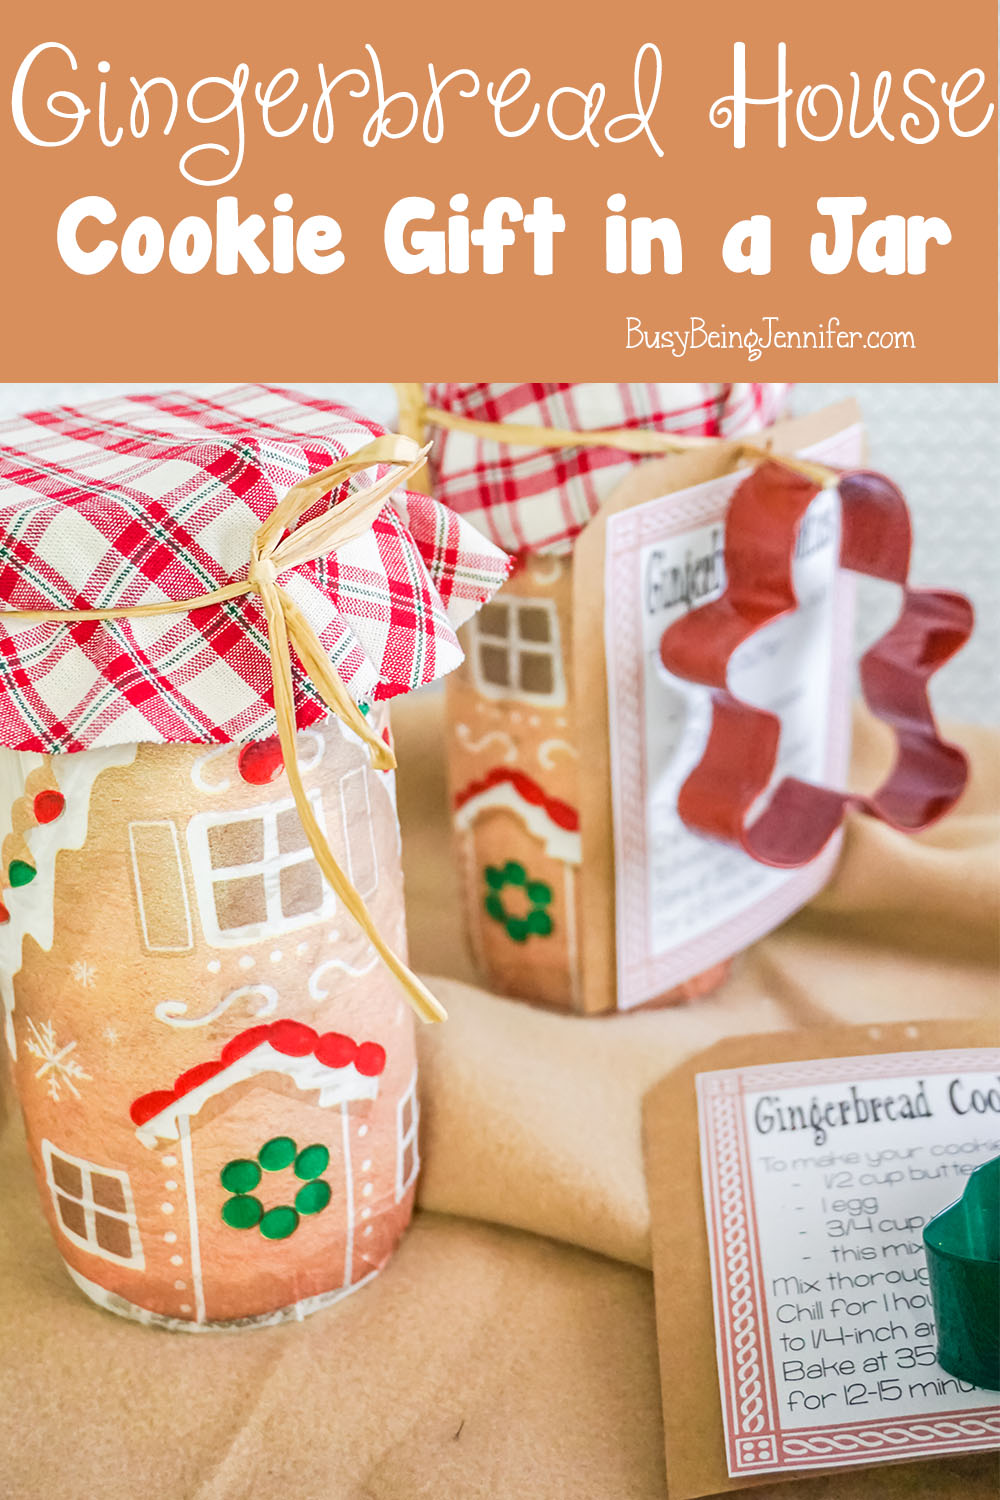 This Gingerbread House Mason Jar Cookie Mix in a Jar Gift is PERFECT for bringing a feeling of family and home to your gift recipients.